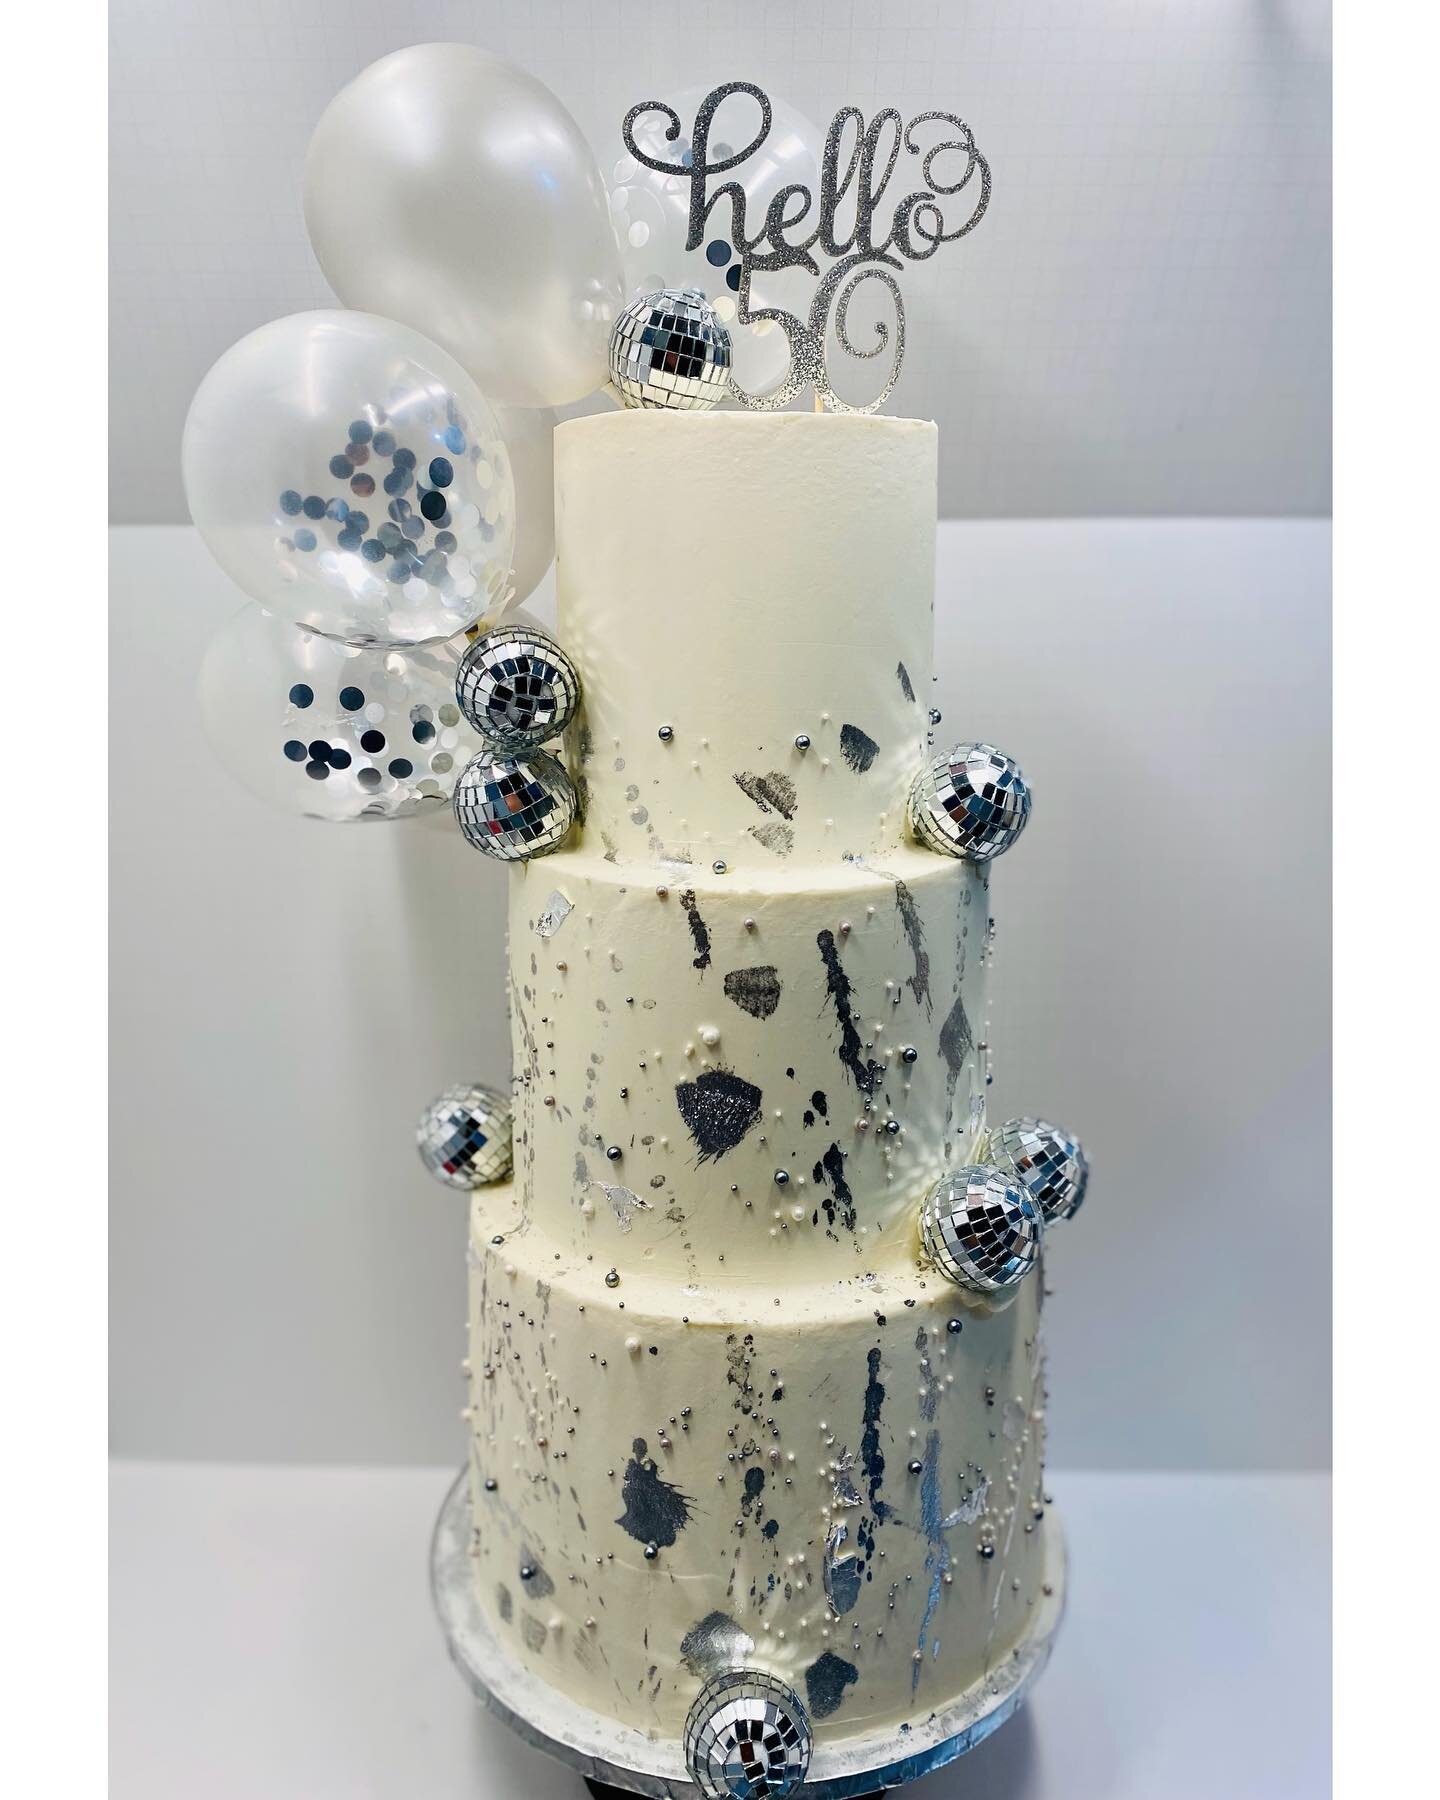 Happy 50th birthday🤍 big cake for a big birthday, lots of silver dust, silver leaf and silver sprinkles to make it shine 
.
.
.
.
.
.
.
.
#happy50thbirthday #silvercake #balloonscaketopper #silver #discoballs #cakesofinstagram #cakedecorating #cakes